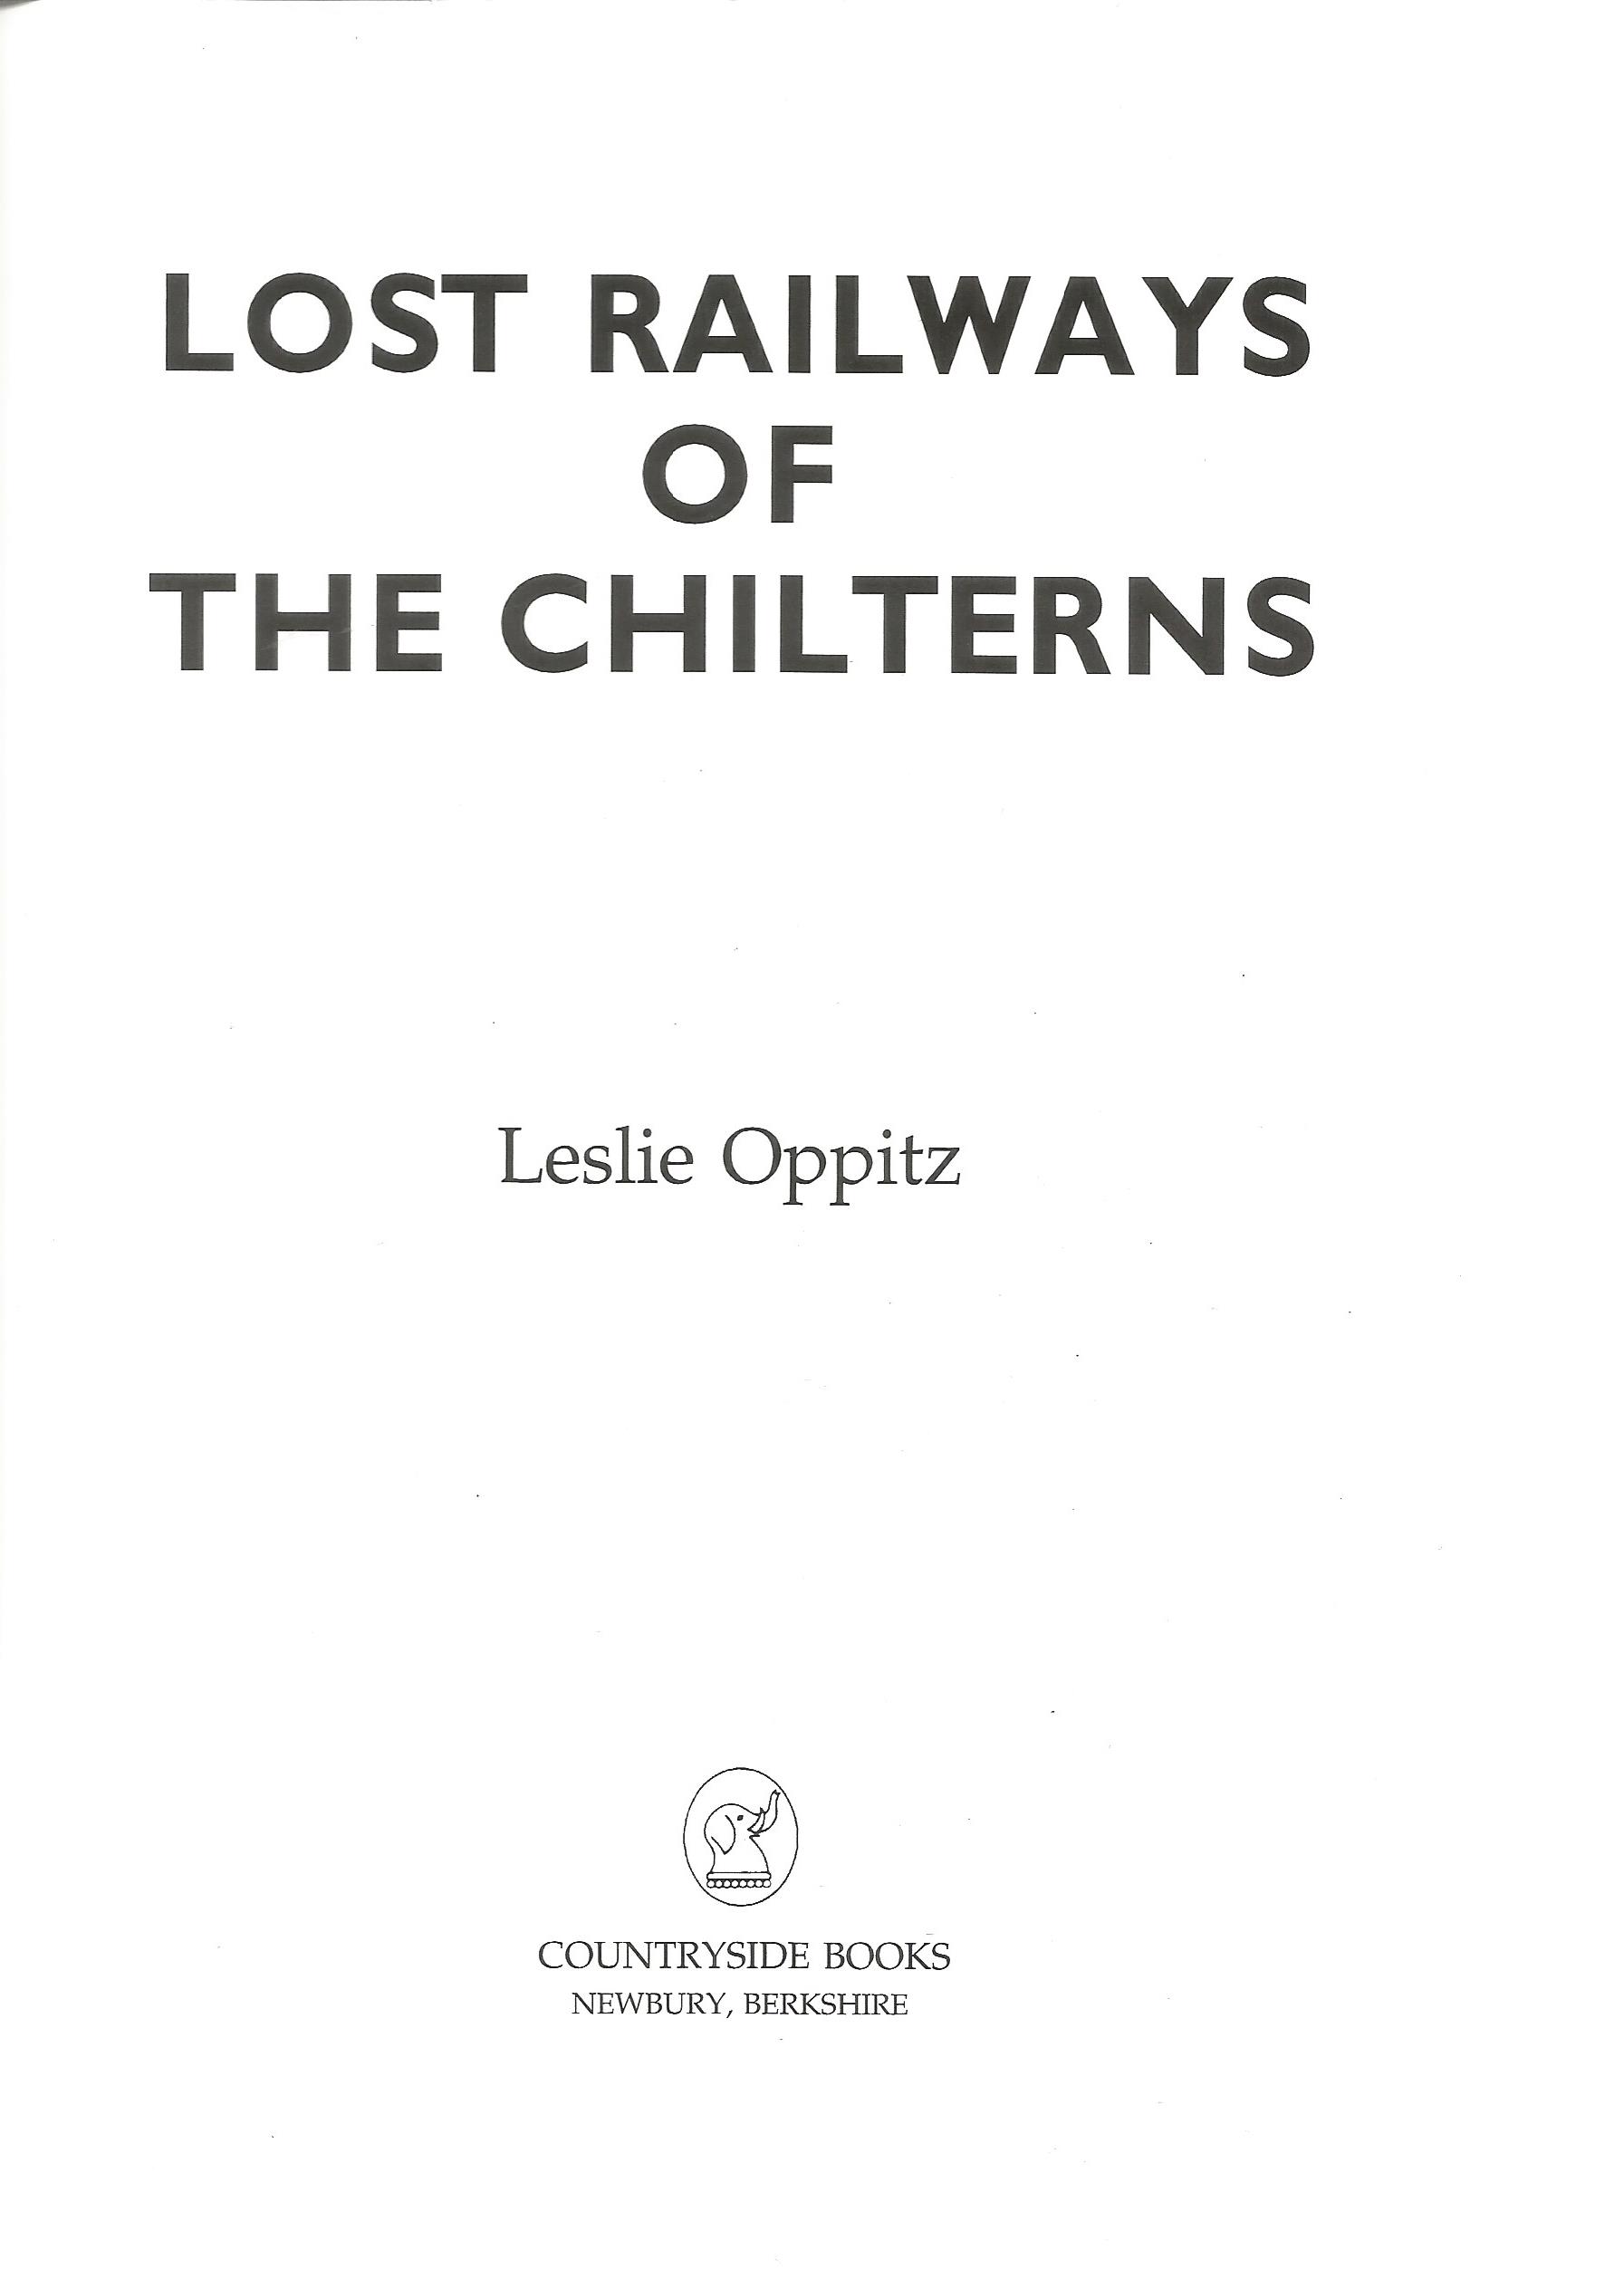 Lost Railways of the Chilterns by Leslie Opitz 2005 Softback Book published by Countryside Books - Image 2 of 3